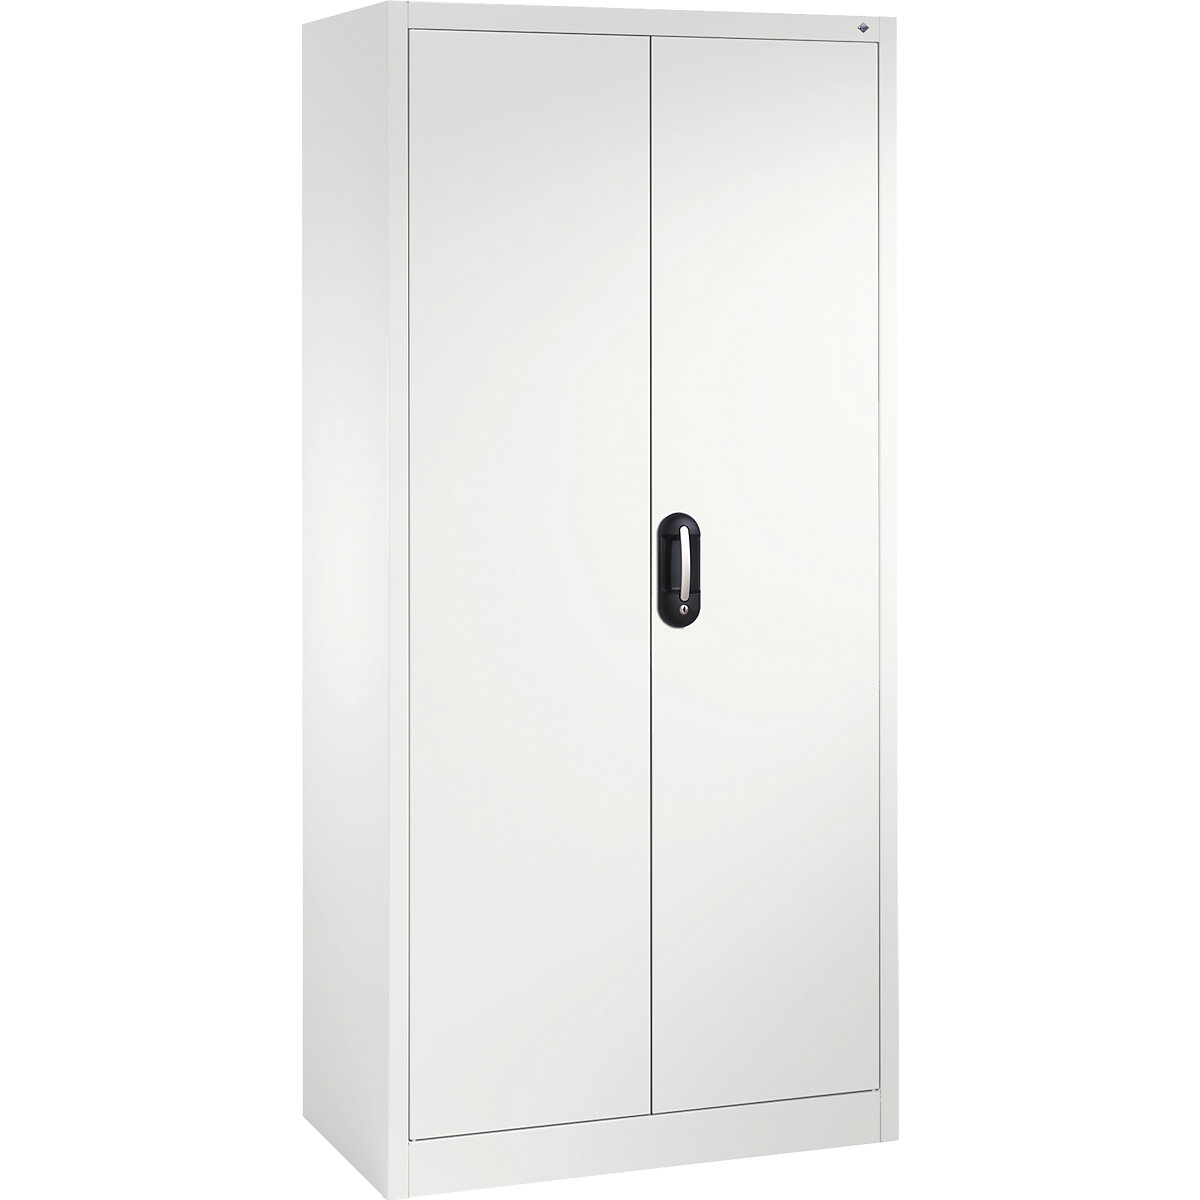 ACURADO universele kast – C+P, b x d = 930 x 400 mm, zuiver wit/zuiver wit-14